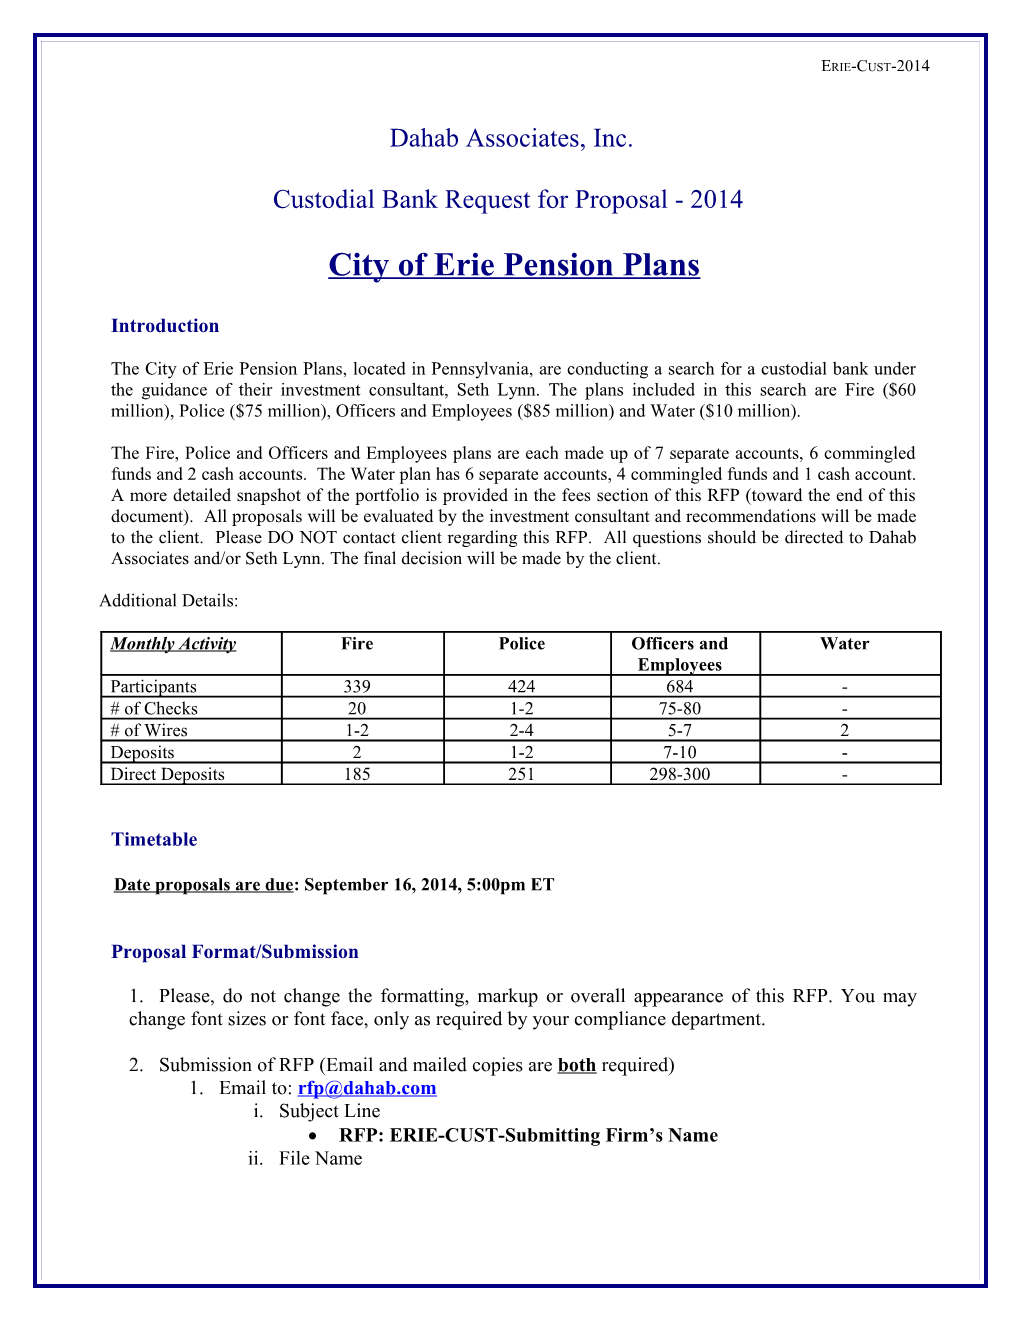 Custodial Bank Request for Proposal - 2014